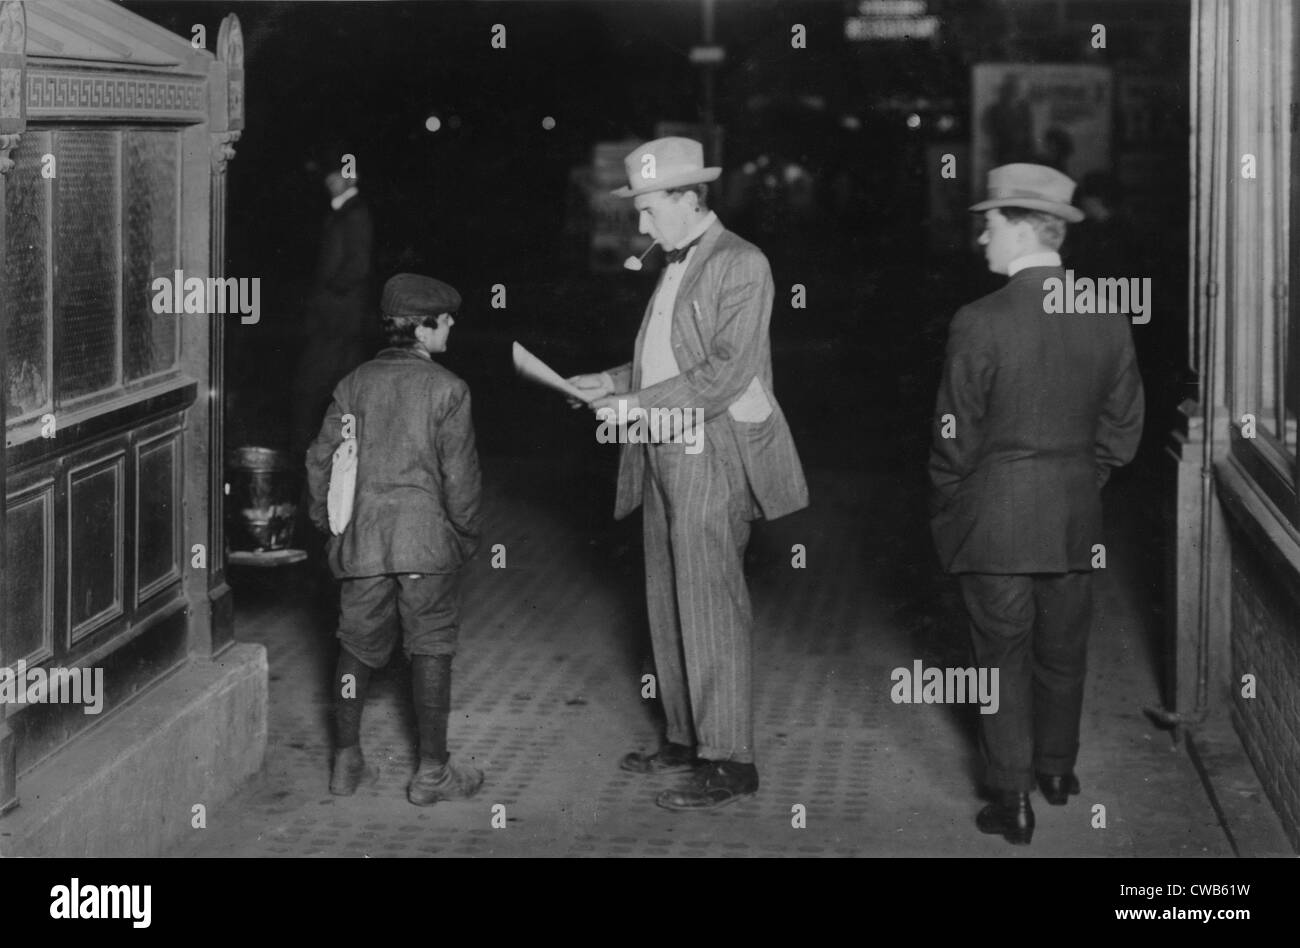 Child labor, original caption: 'Tony Spappos, 349 W. 39th St., N.Y., Selling papers at 10 P.M. at 50th Street & Broadway. About Stock Photo